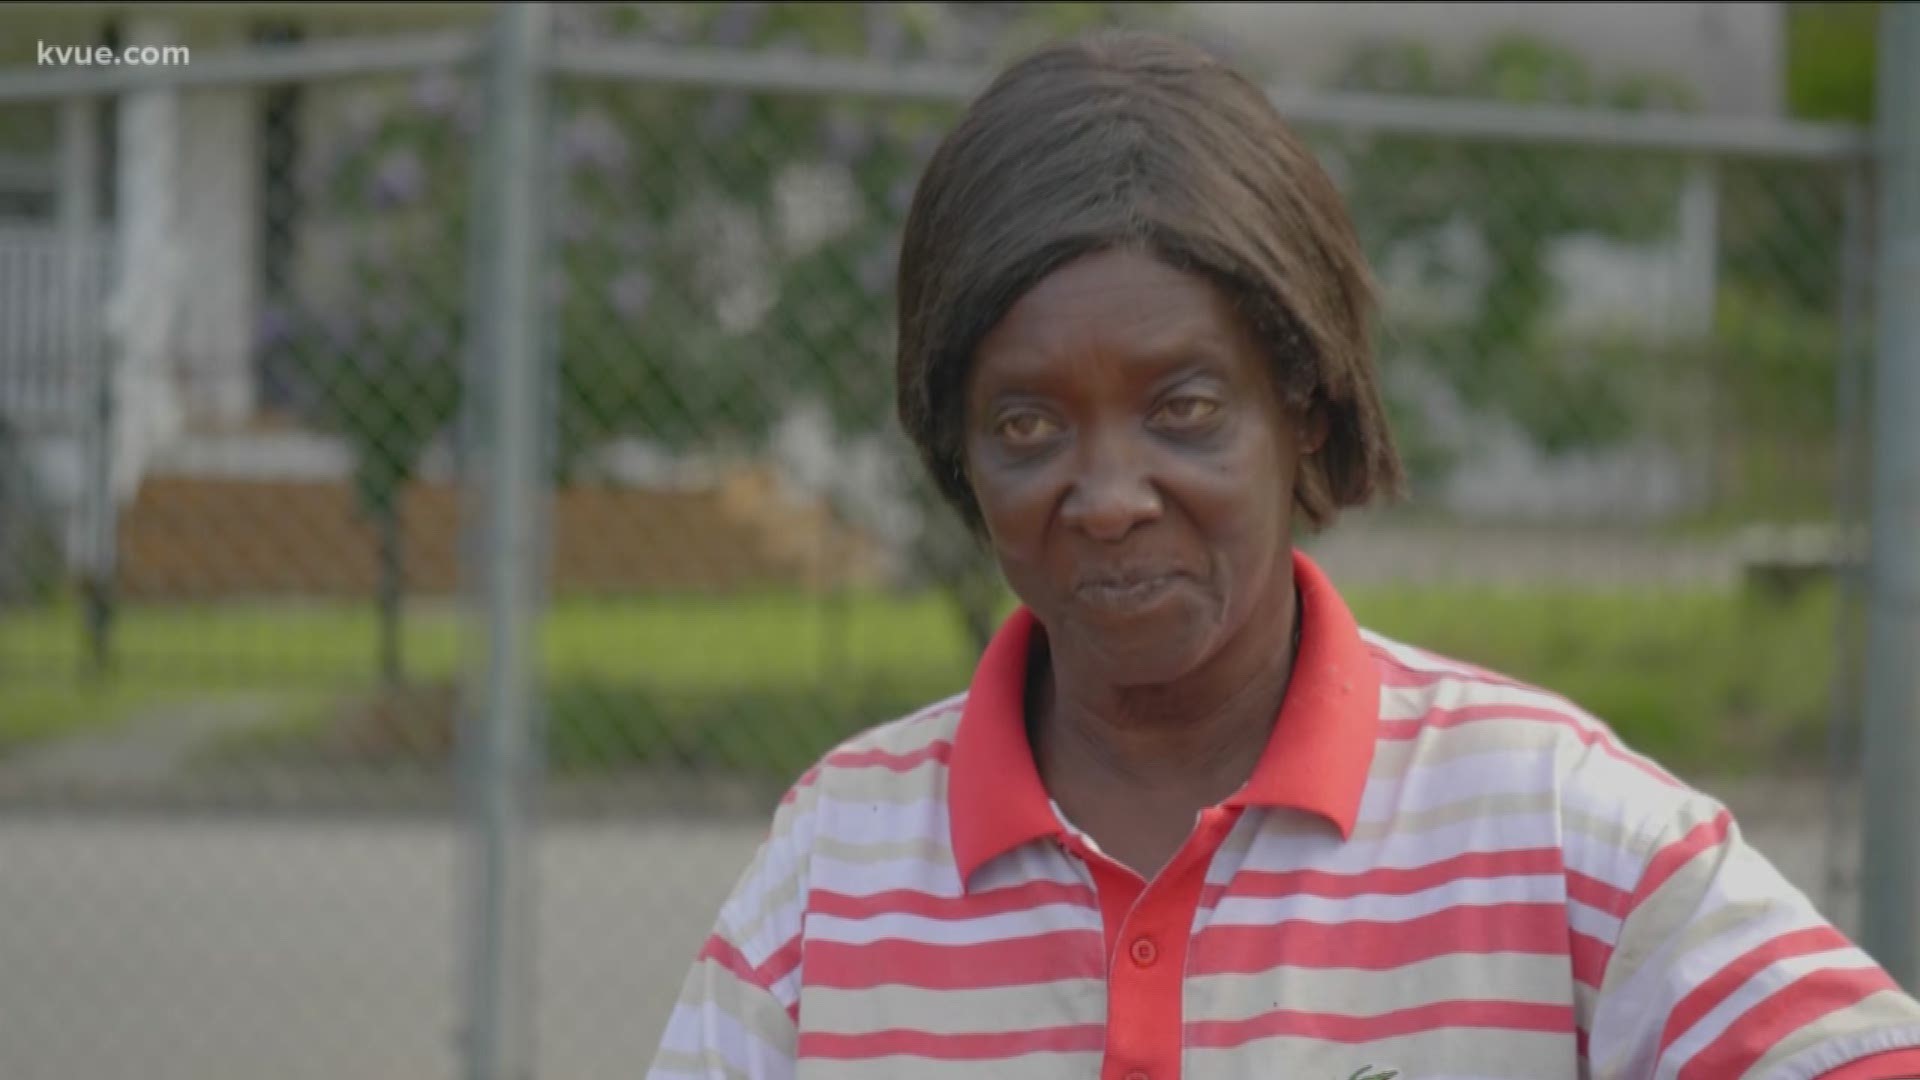 Mary Clark lost her home in a fire several years ago. She's been homeless ever since.